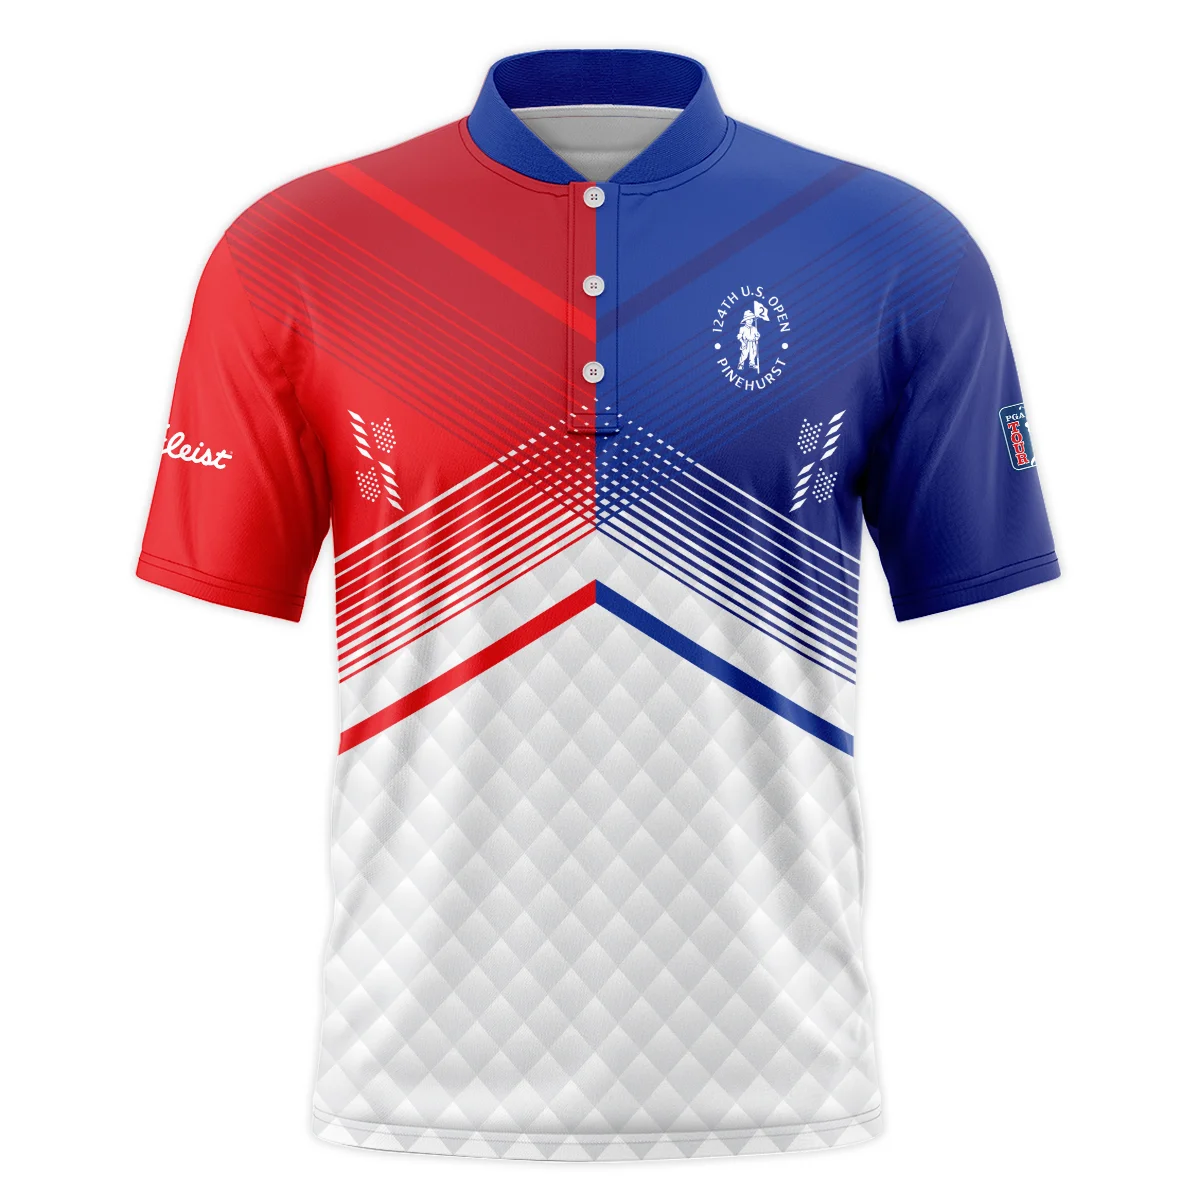 Titleist 124th U.S. Open Pinehurst Blue Red Line White Abstract Long Polo Shirt Style Classic